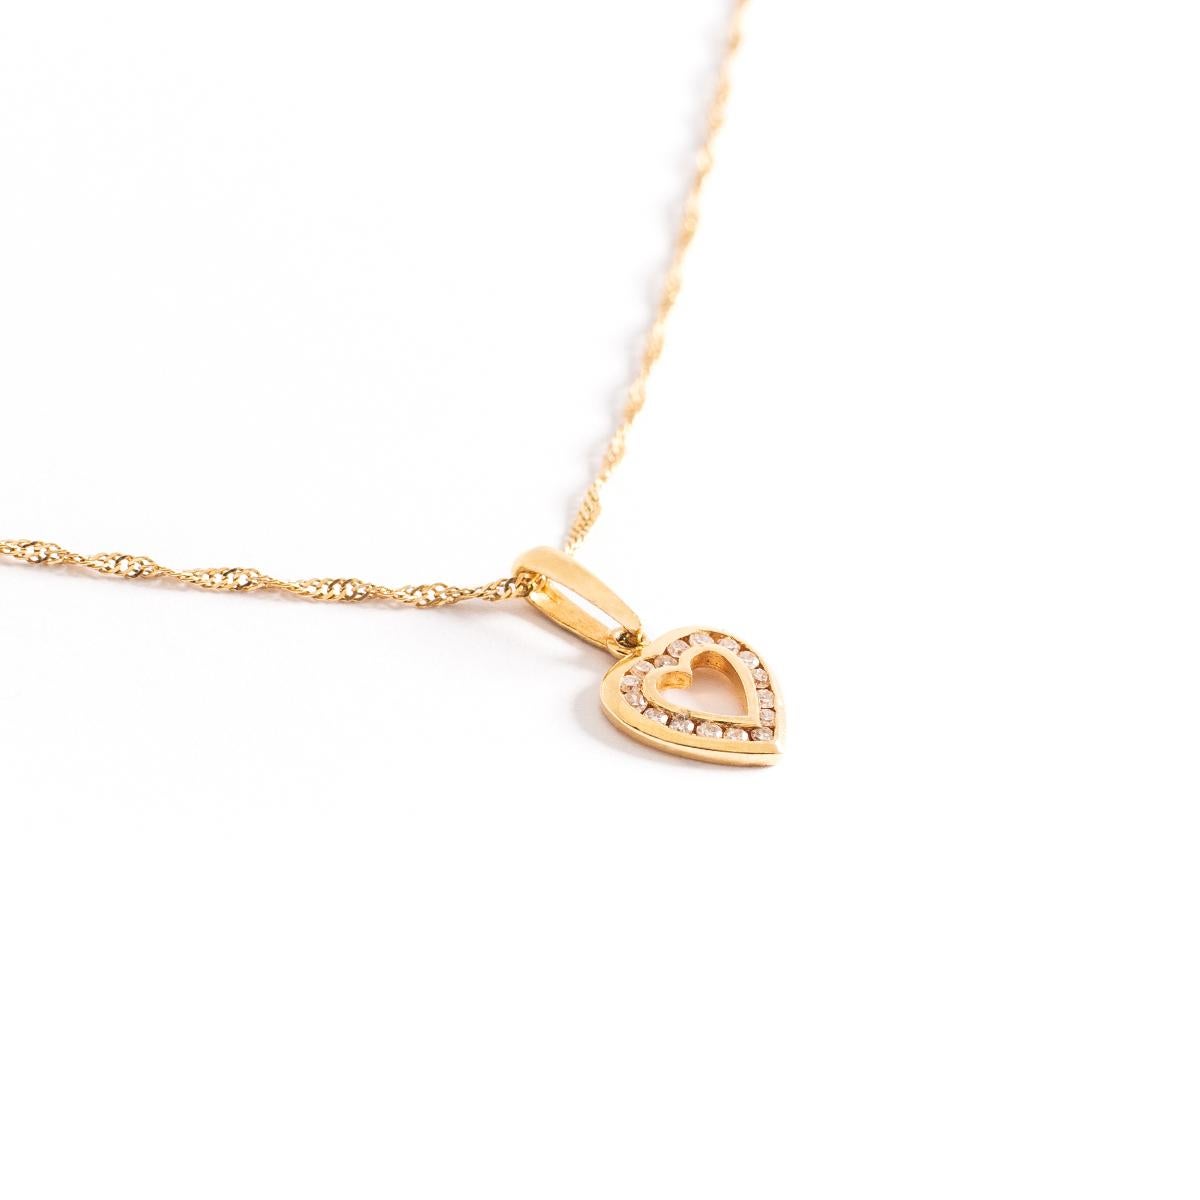 Heart Shape pendant with diamond on yellow gold.
Chain necklace in yellow gold.
Diamond estimated weight: 0.005 carat.
Pendent length: 1.50 centimeters including bail.
Chain length: 40.00 centimeters.
Gross weight: 1.64 grams.
